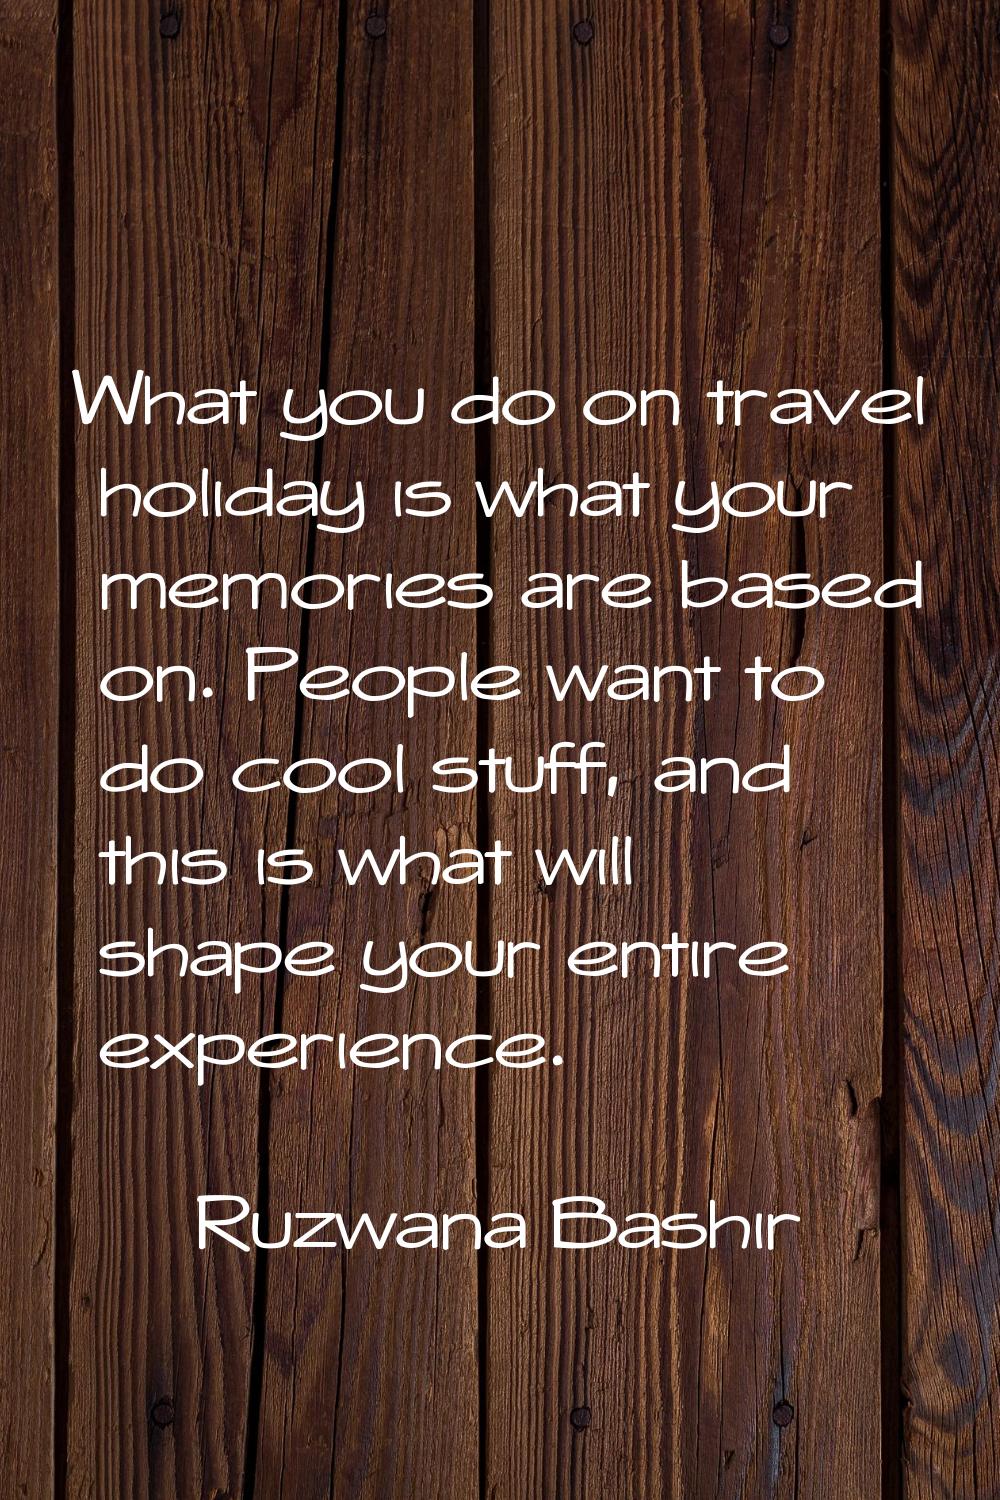 What you do on travel holiday is what your memories are based on. People want to do cool stuff, and